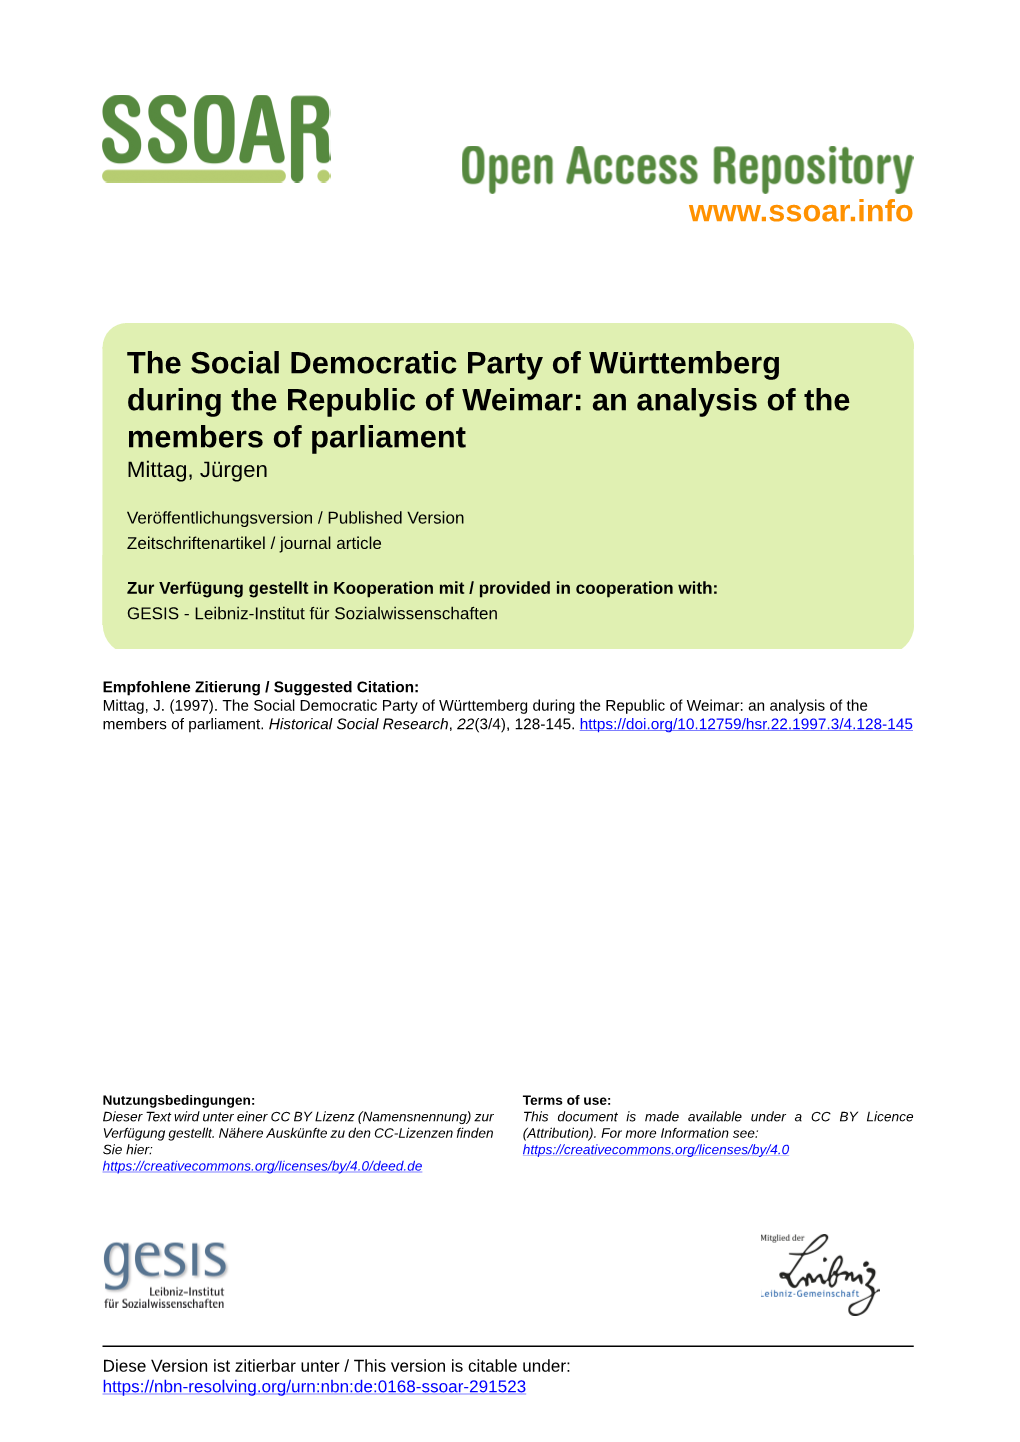 The Social Democratic Party of Württemberg During the Republic of Weimar: an Analysis of the Members of Parliament Mittag, Jürgen